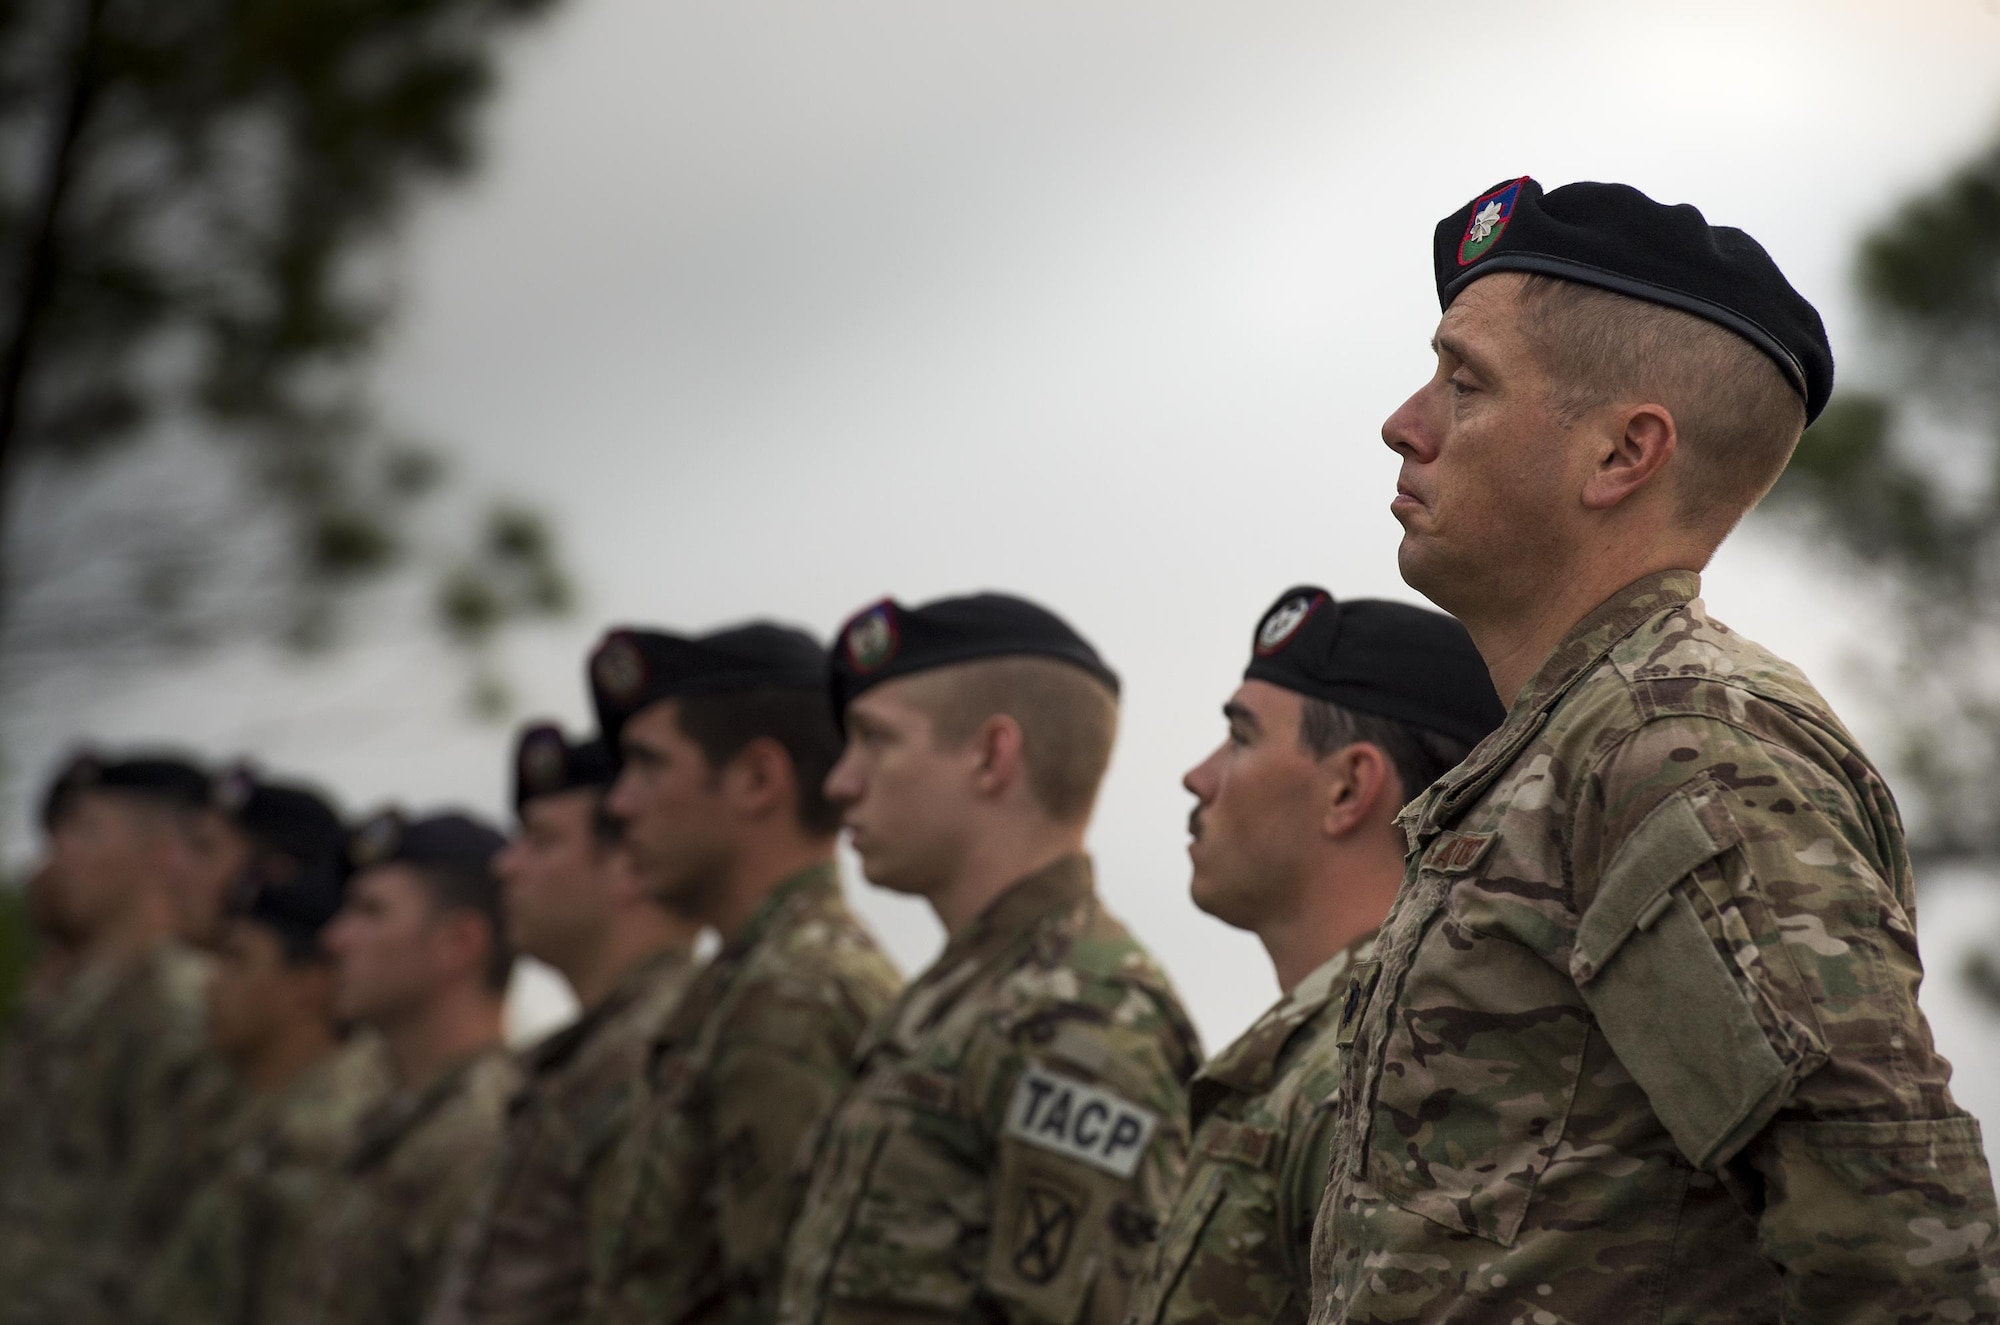 U.S. Air Force Tactical Air Control Party members from the 93d Air Ground Operations Wing stand in formation during a tribute to the late Lt. Col William Schroeder, April 15, 2016, at Avon Park Air Force Range, Fla. Schroeder was the commander of the 342nd Training Squadron at Joint Base San Antonio-Lackland, which is responsible for the entry-level training of all battlefield Airmen. (U.S. Air Force Photo by Senior Airman Ryan Callaghan/Released)
